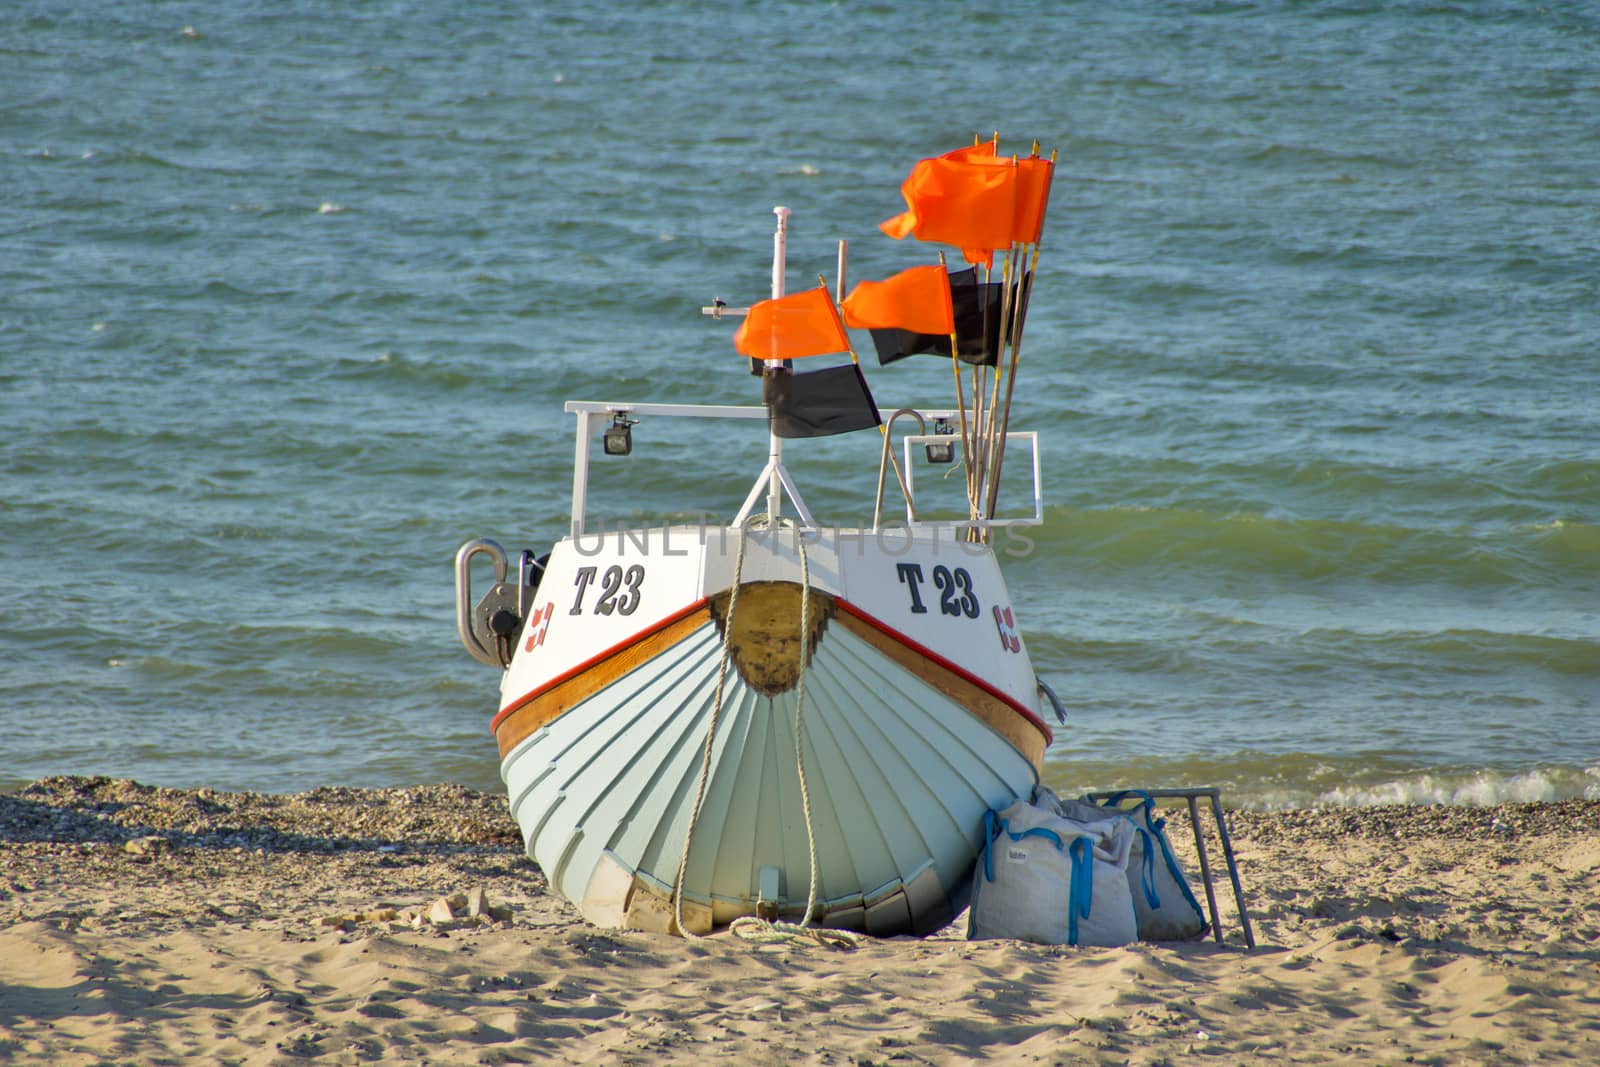 A fishing boat on the beach.